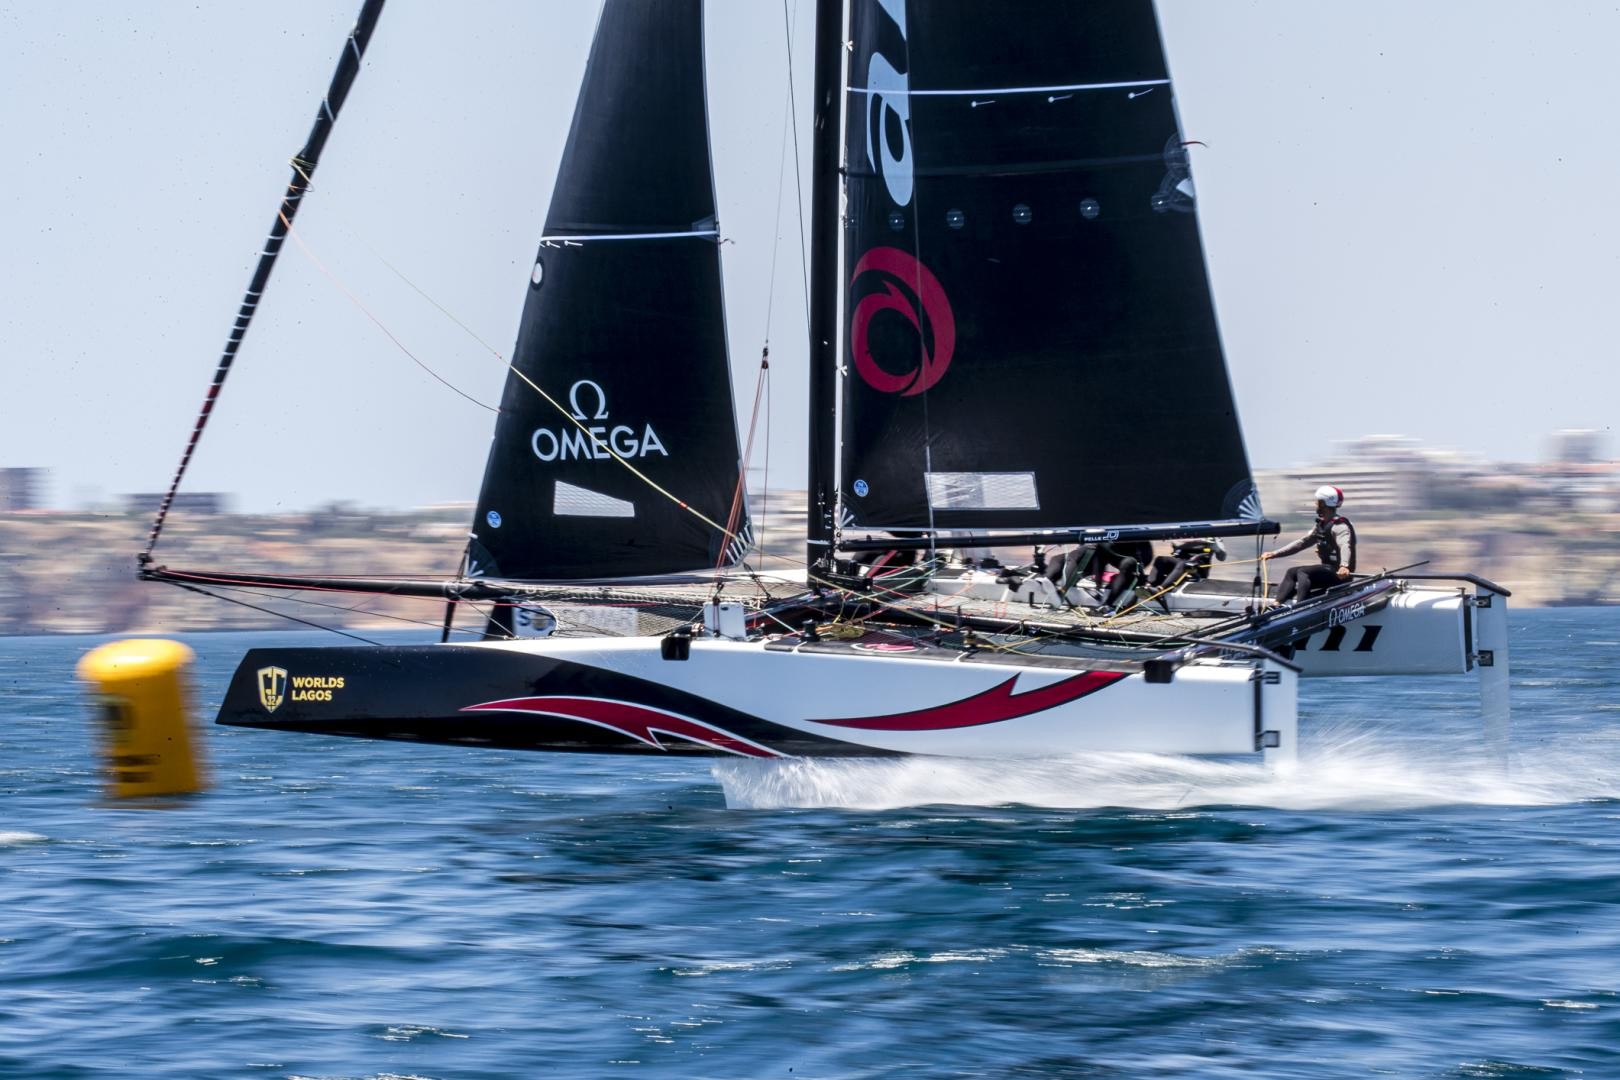 GC32 World Championship winners Alinghi at full pace today